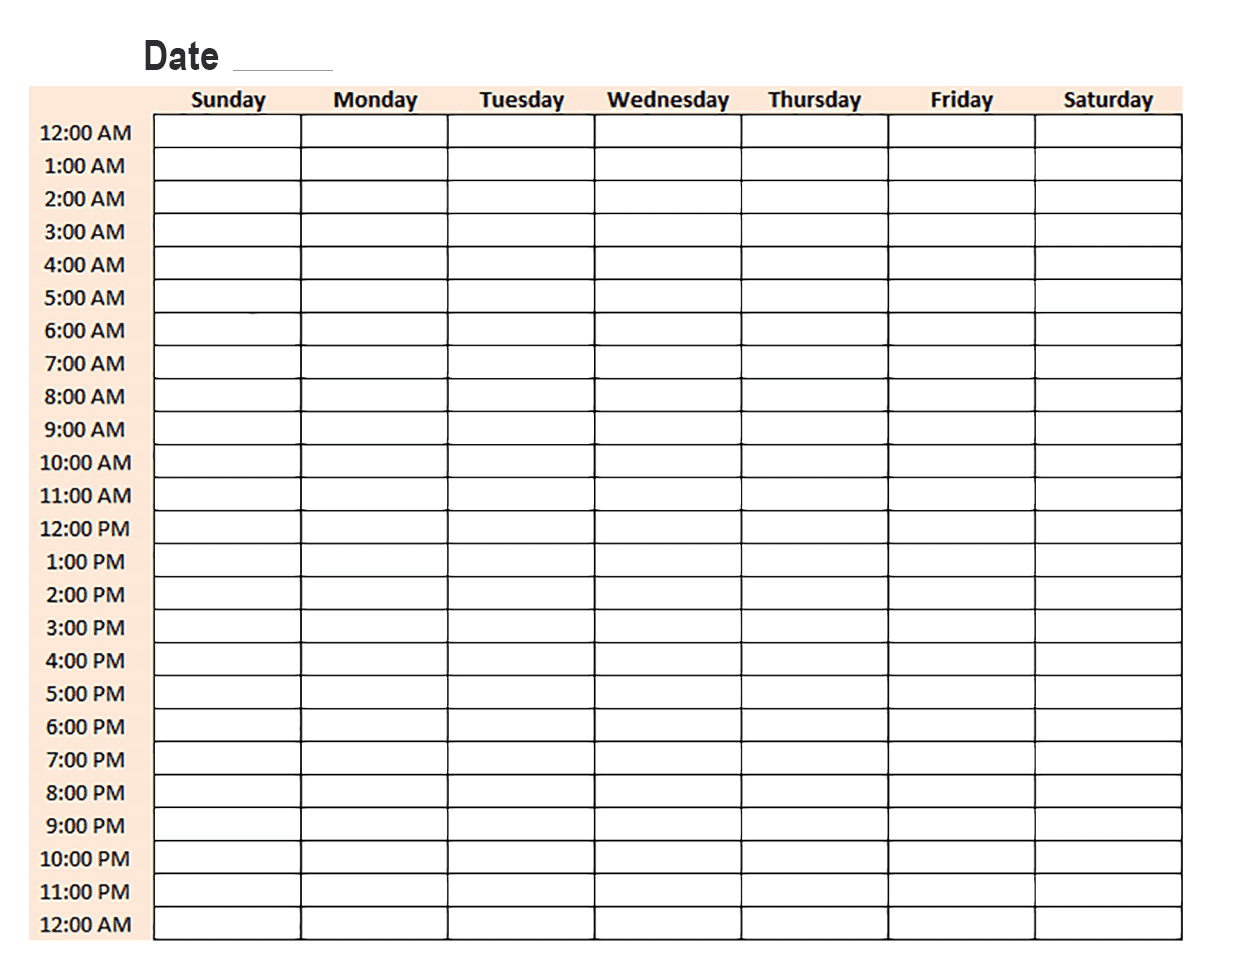 daily planner template word free